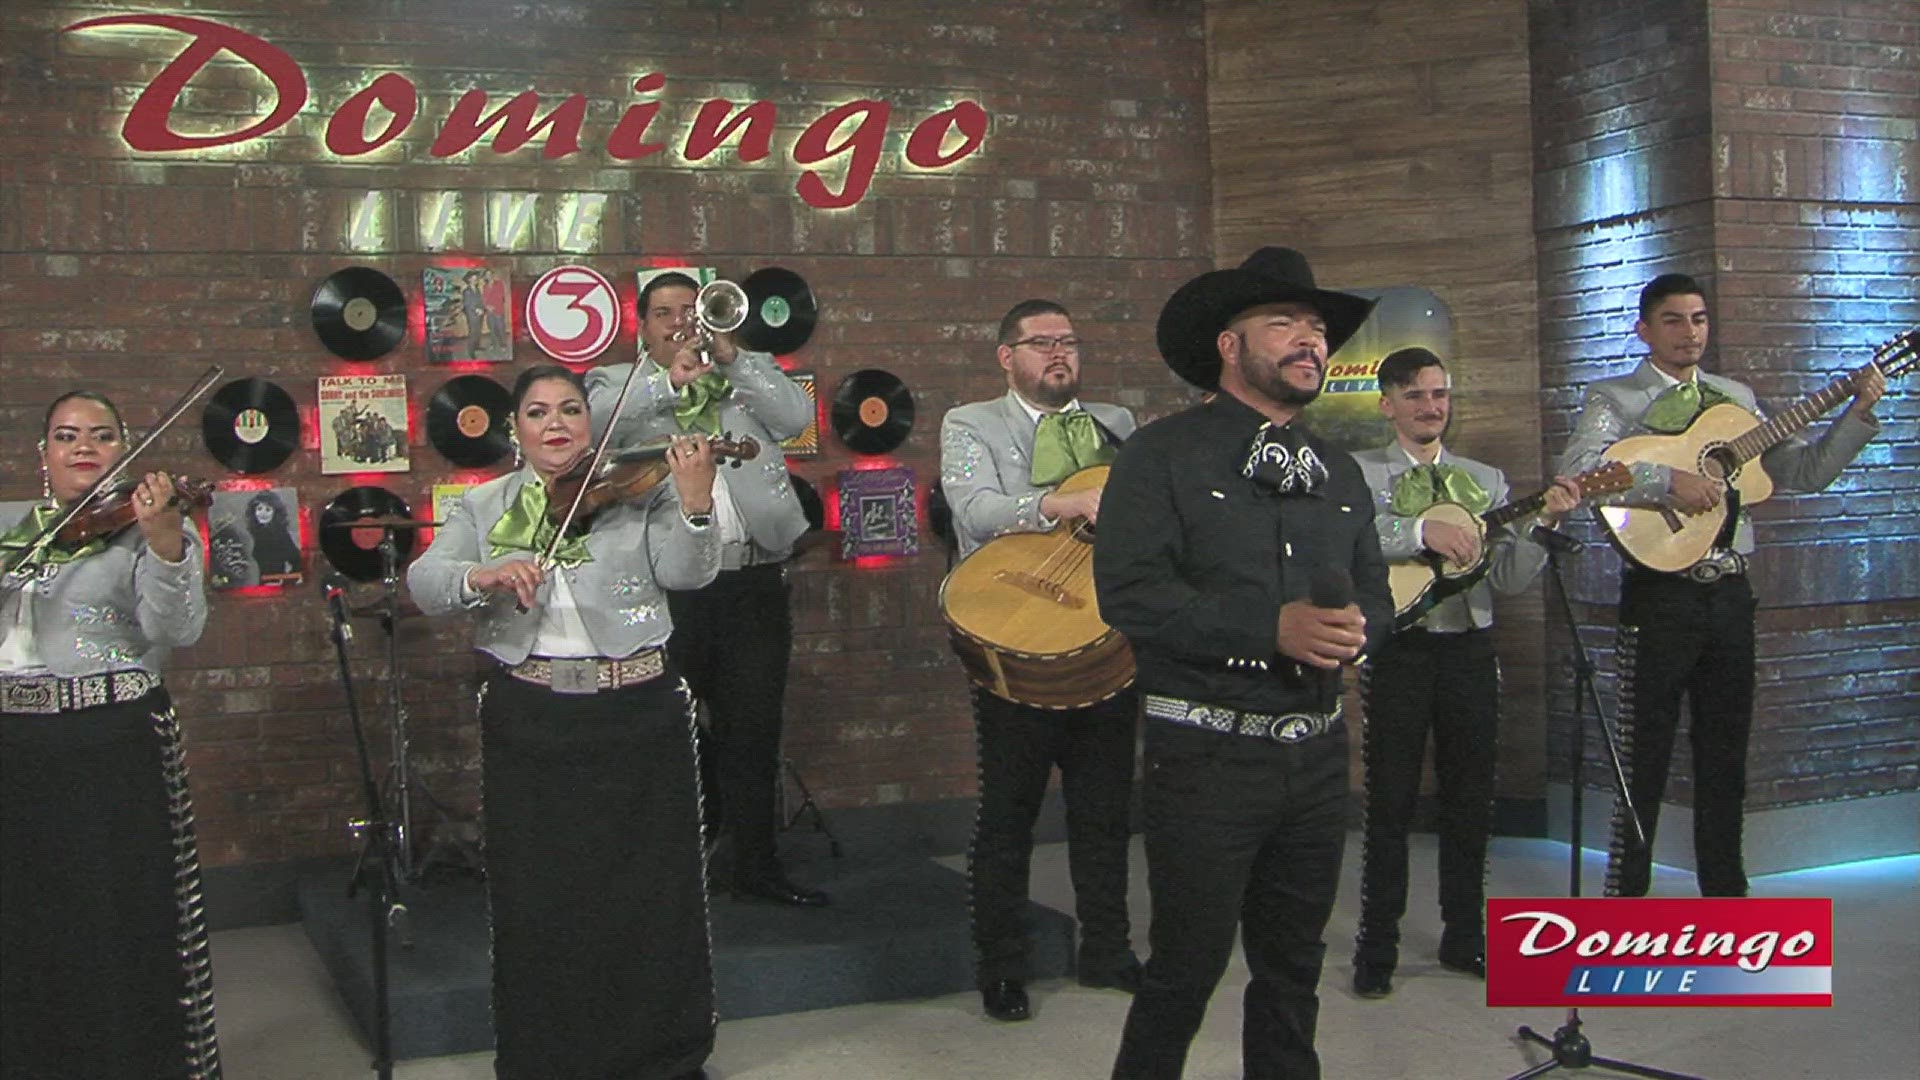 Michael Salgado and Mariachi Celestial joined us on Domingo Live to perform "Aca Entre Nos."